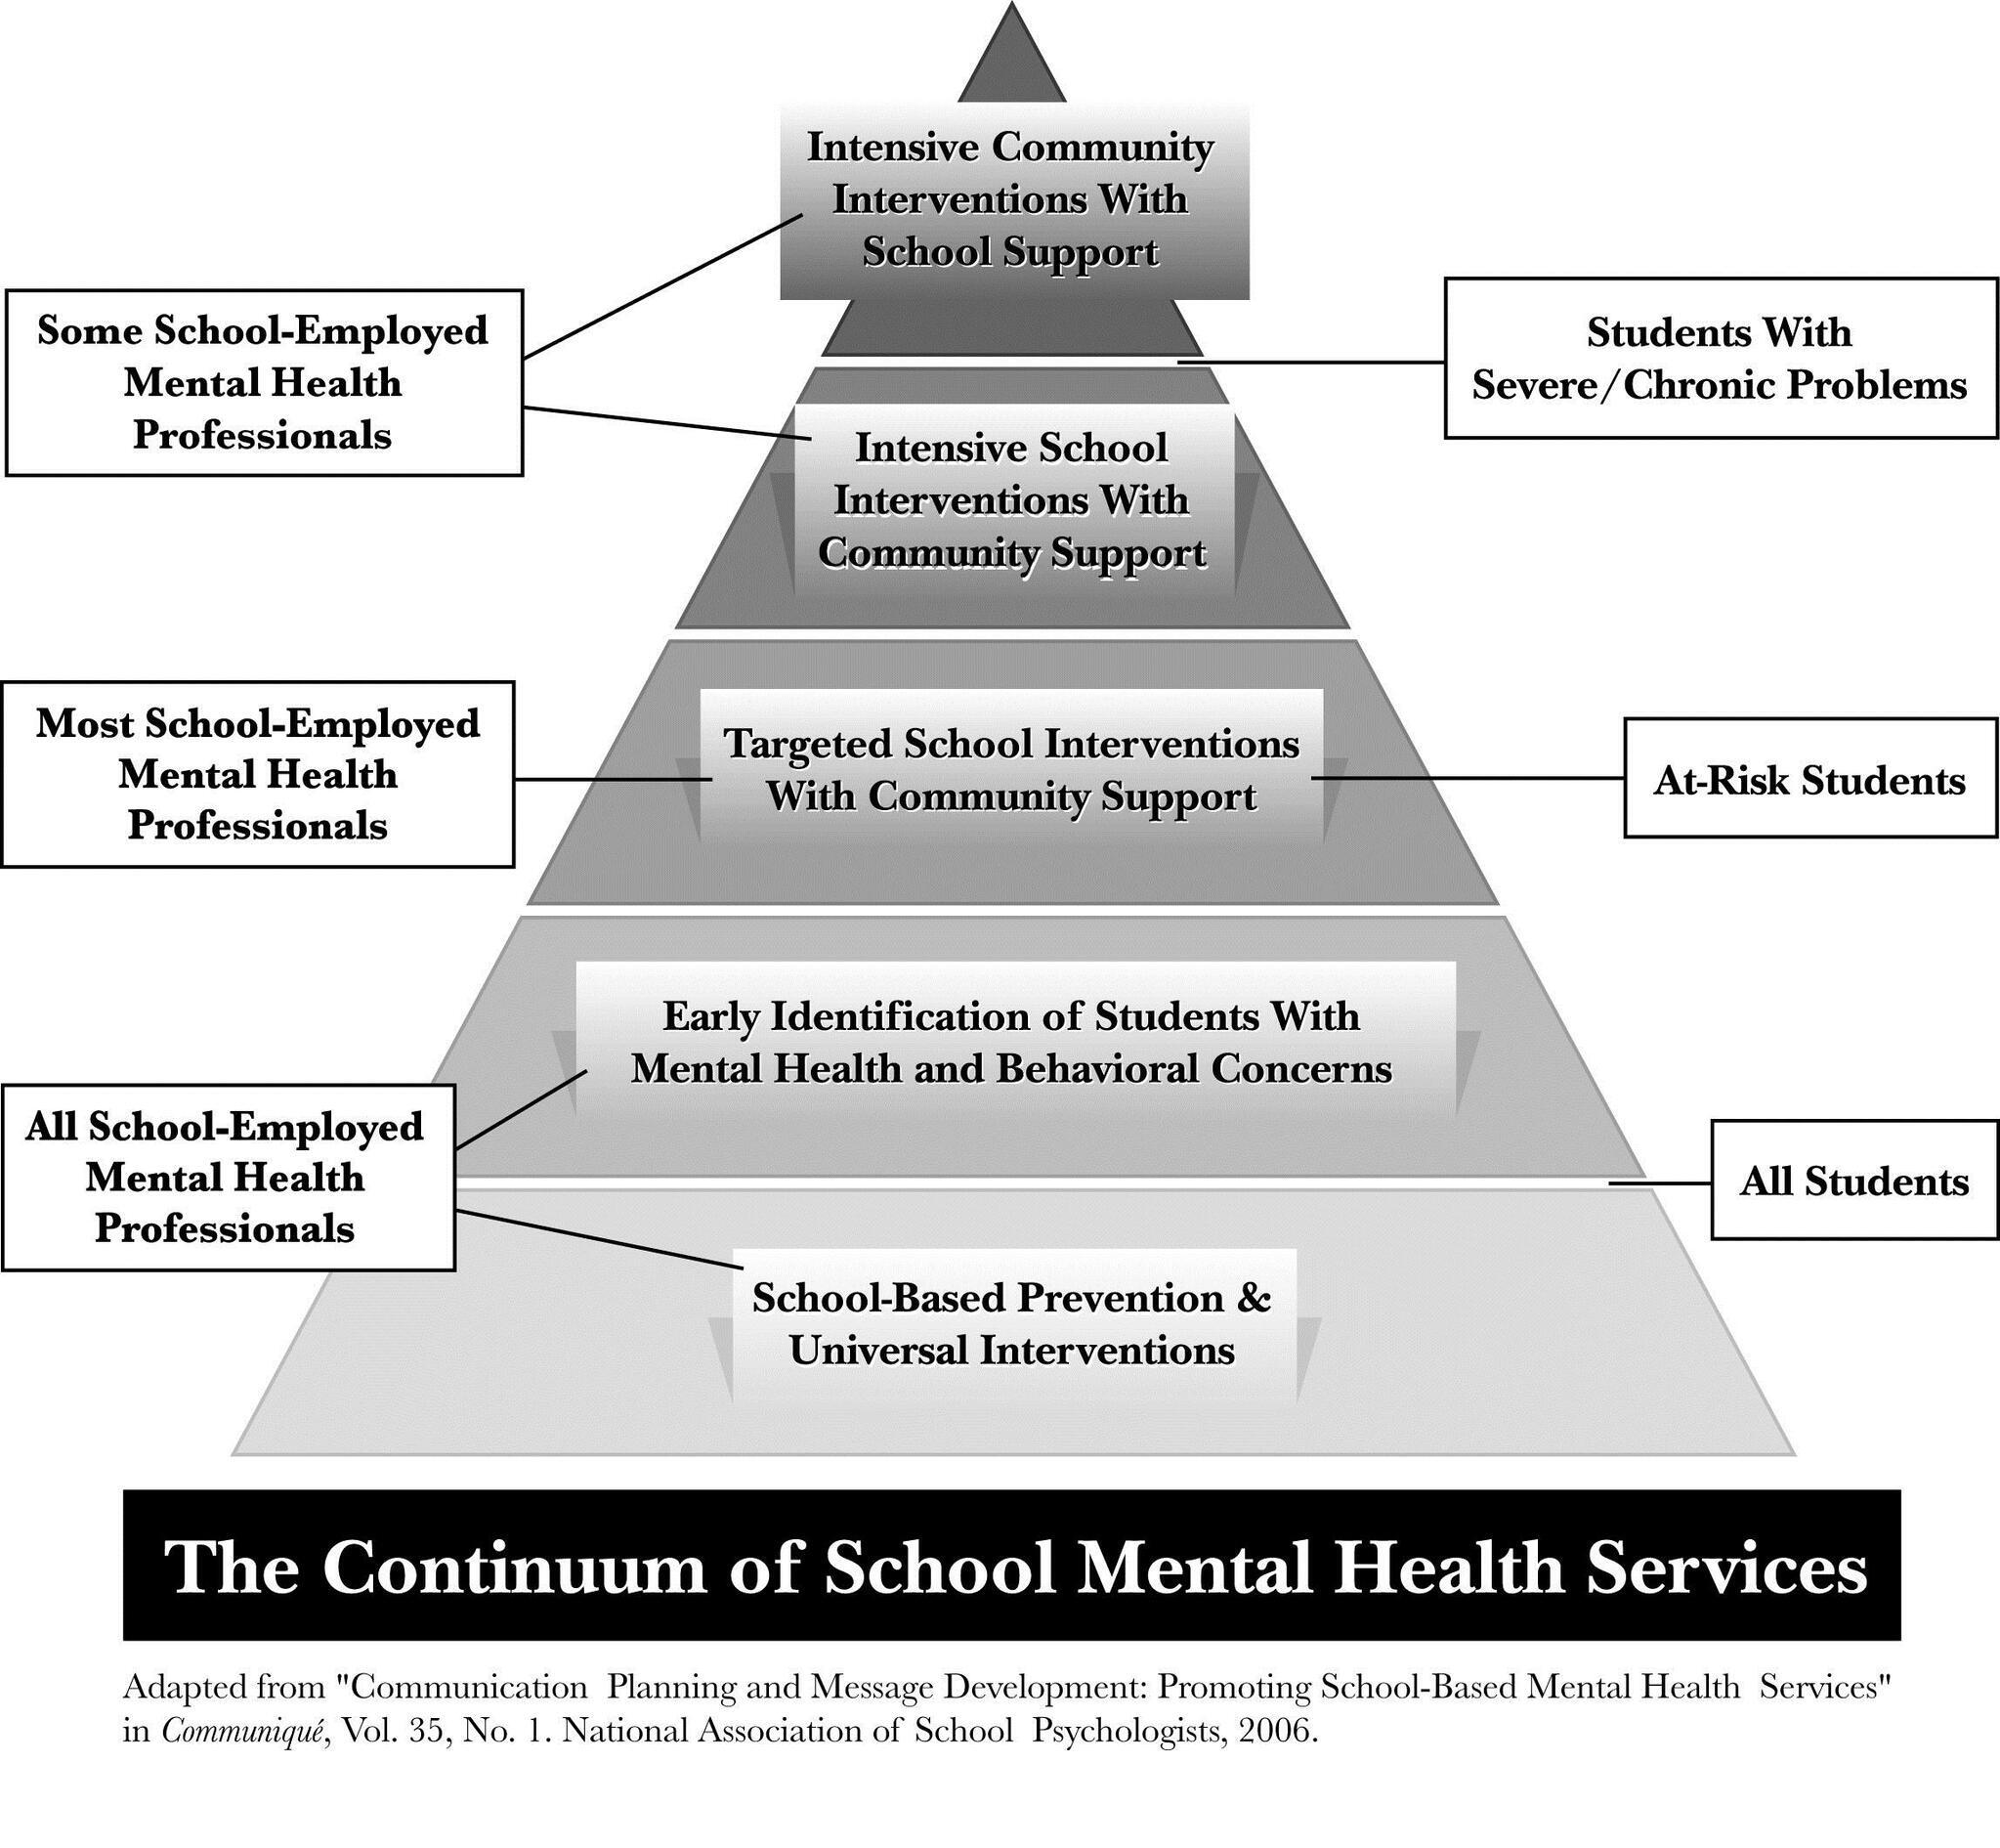 The Continuum for School Mental Health Services